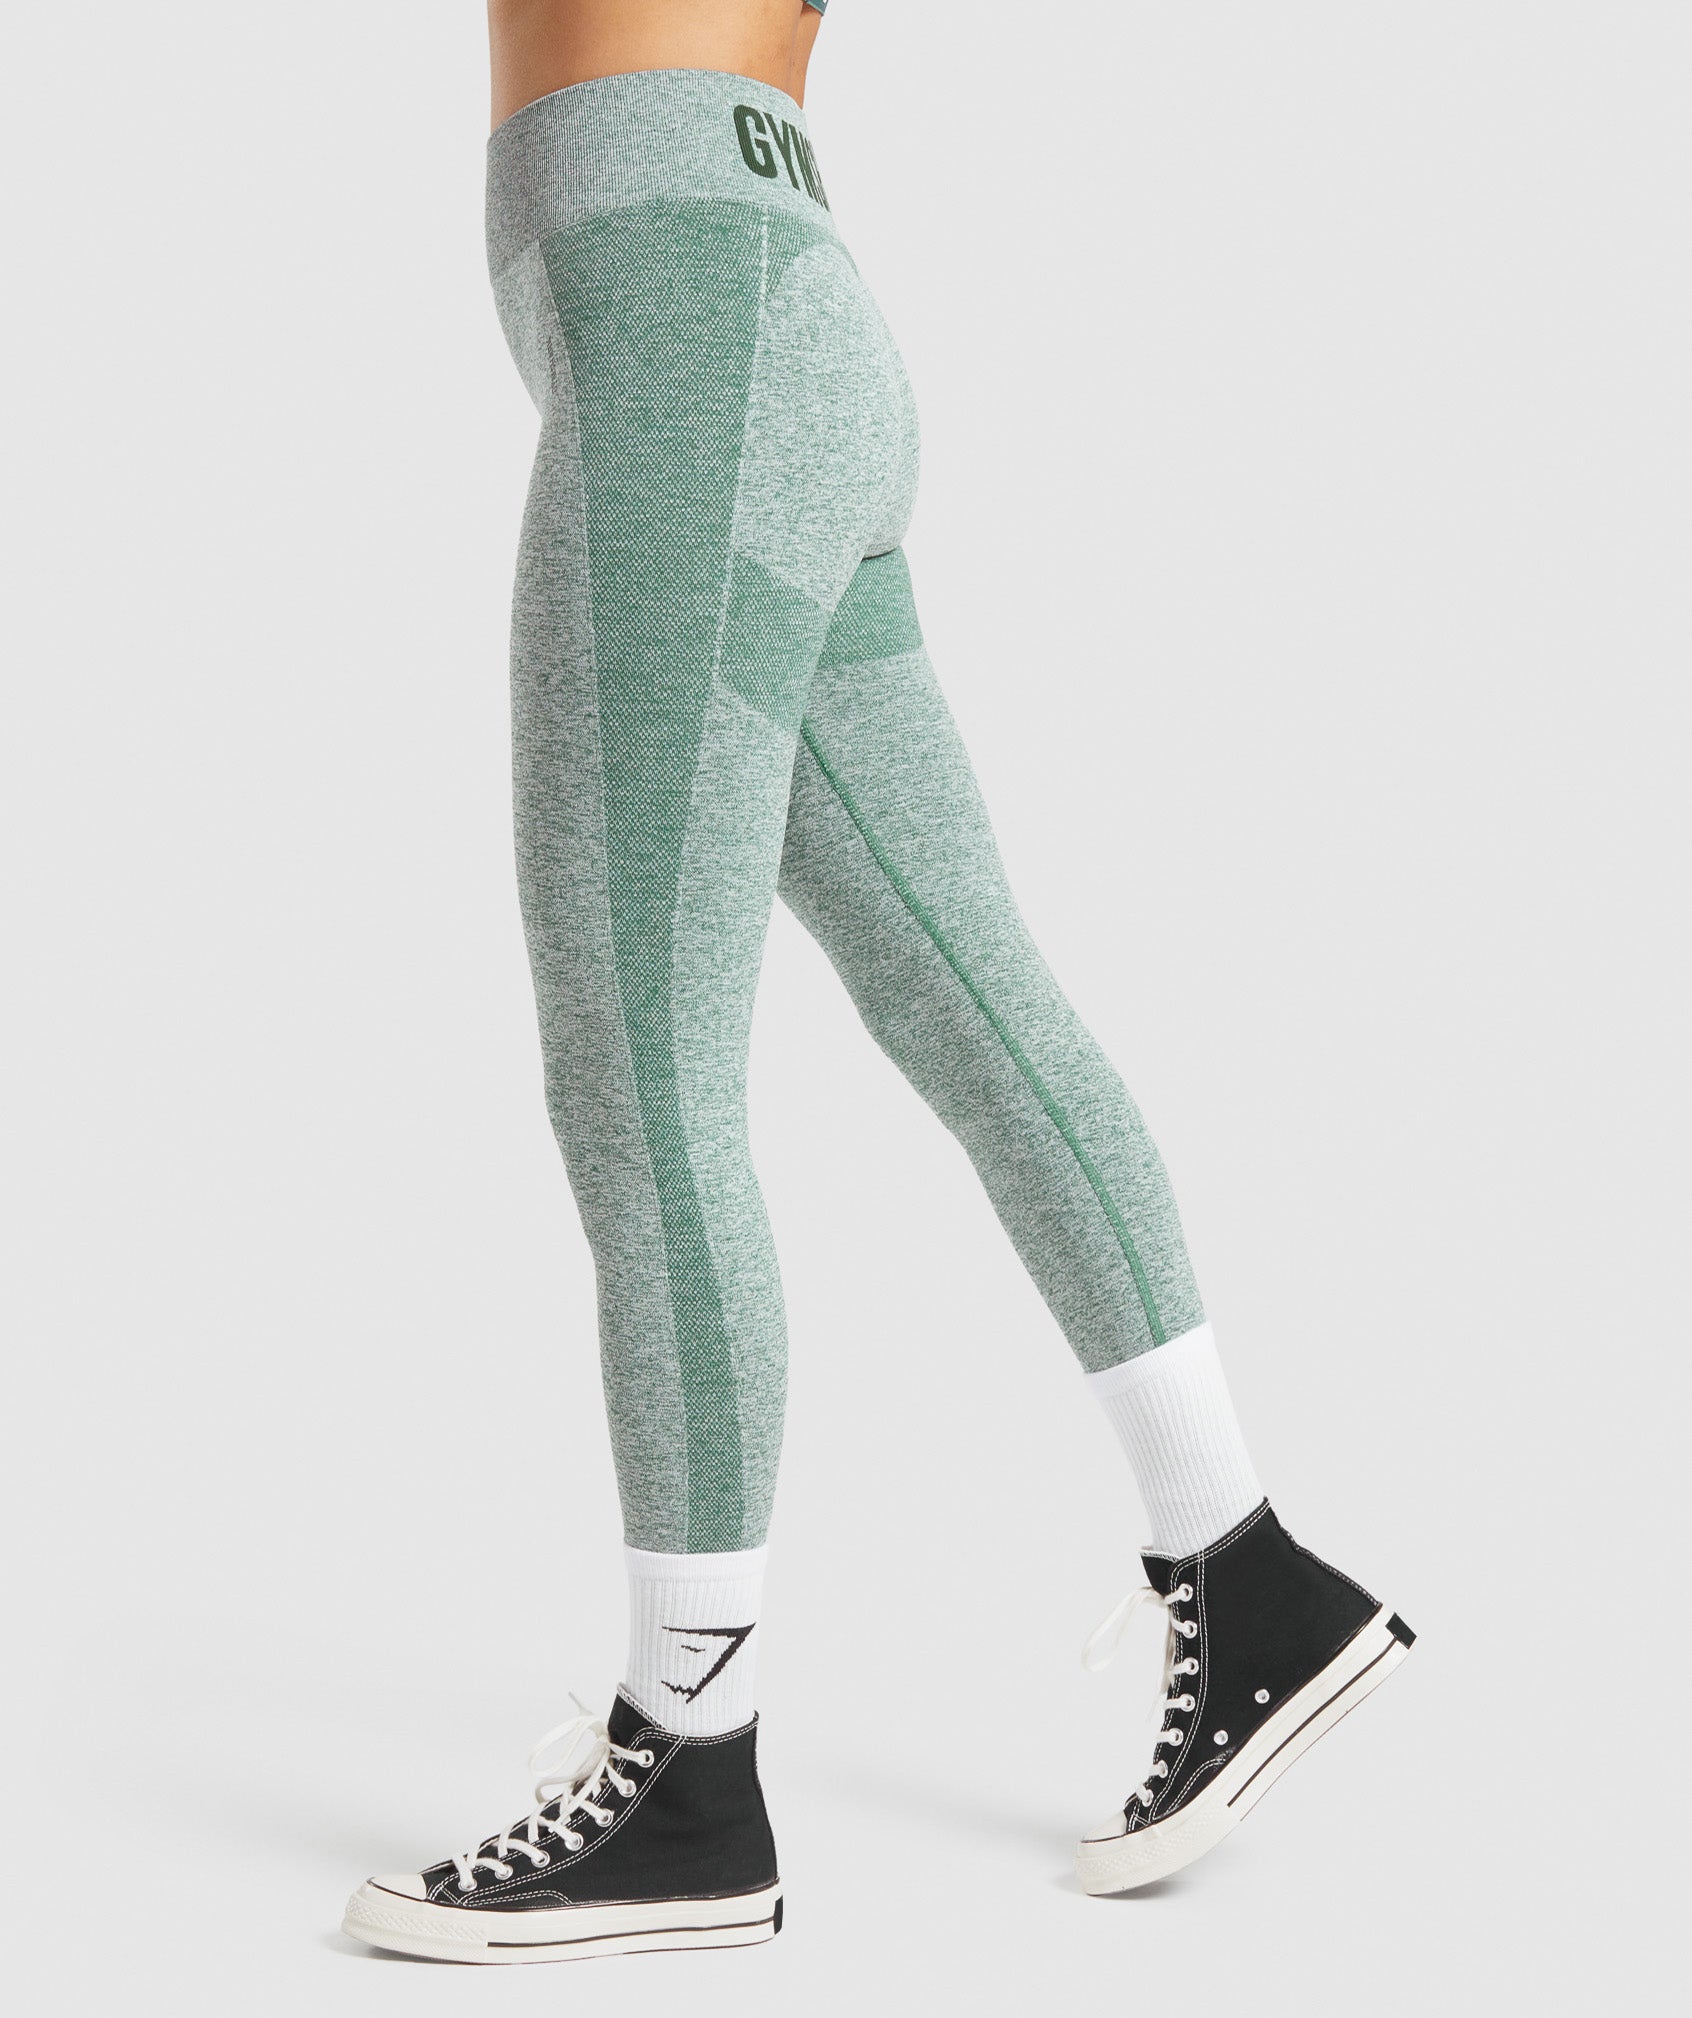 Gymshark Flex Leggings in Smokey Grey Marl/Jade Green Multiple - $40 New  With Tags - From May